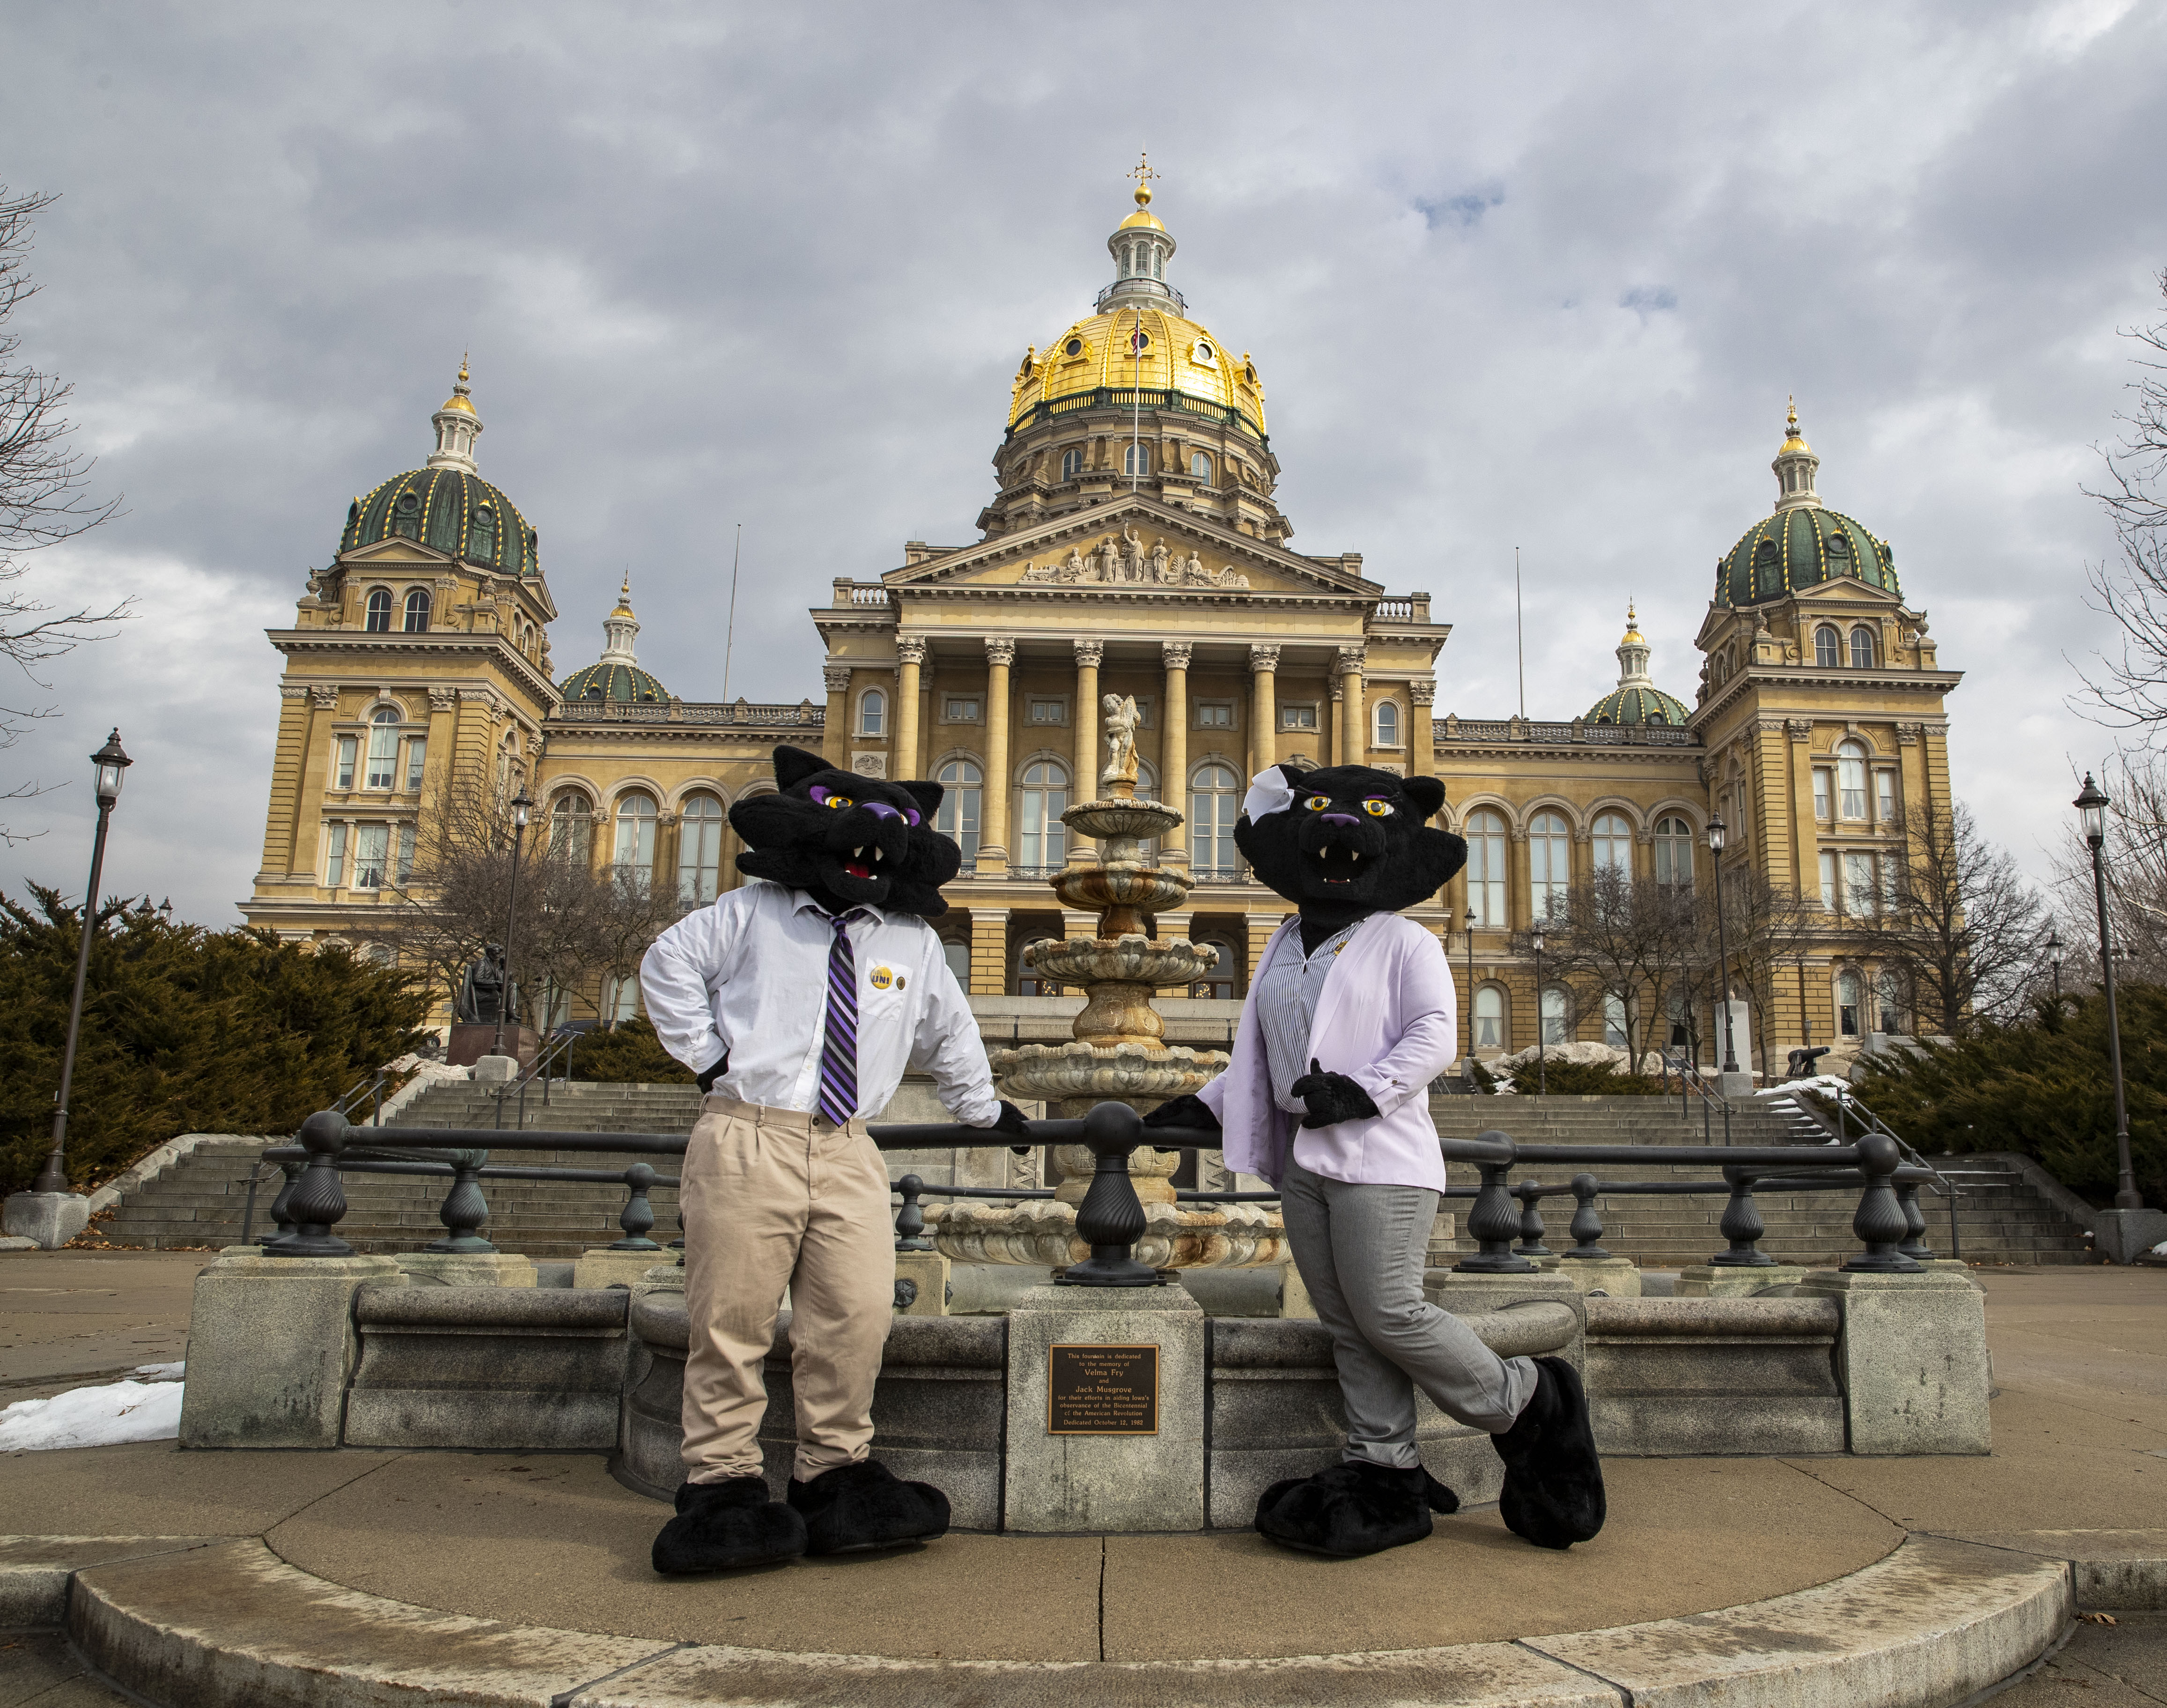 TC & TK at the Iowa State Capitol in Des Moines